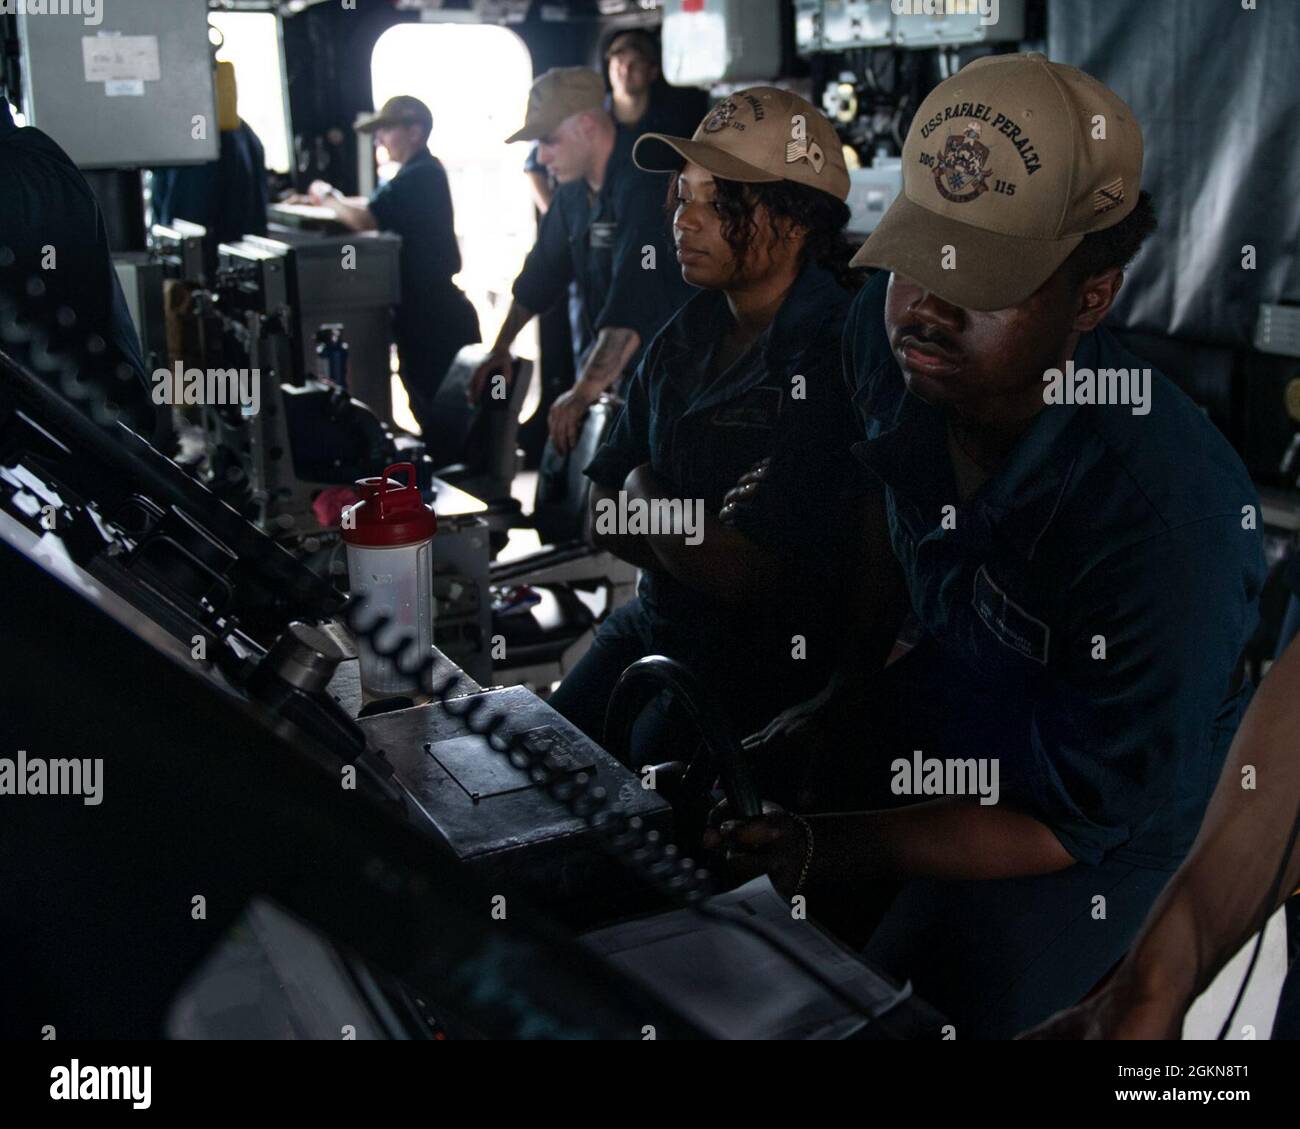 210603-N-HG846-1062 SEA OF JAPAN (June 3, 2021) – Retail Specialist Seaman Alescia Pugh (left), from Schenectady, N.Y., and Seaman Dravian Marbury, from Atlanta, Ga., man the lee helm and helm in the pilot house aboard Arleigh Burke-class guided-missile destroyer USS Rafael Peralta (DDG 115). Rafael Peralta is assigned to Commander, Task Force 71/Destroyer Squadron (DESRON) 15, the Navy's largest forward-deployed DESRON and U.S. 7th Fleet's principal surface force. Stock Photo